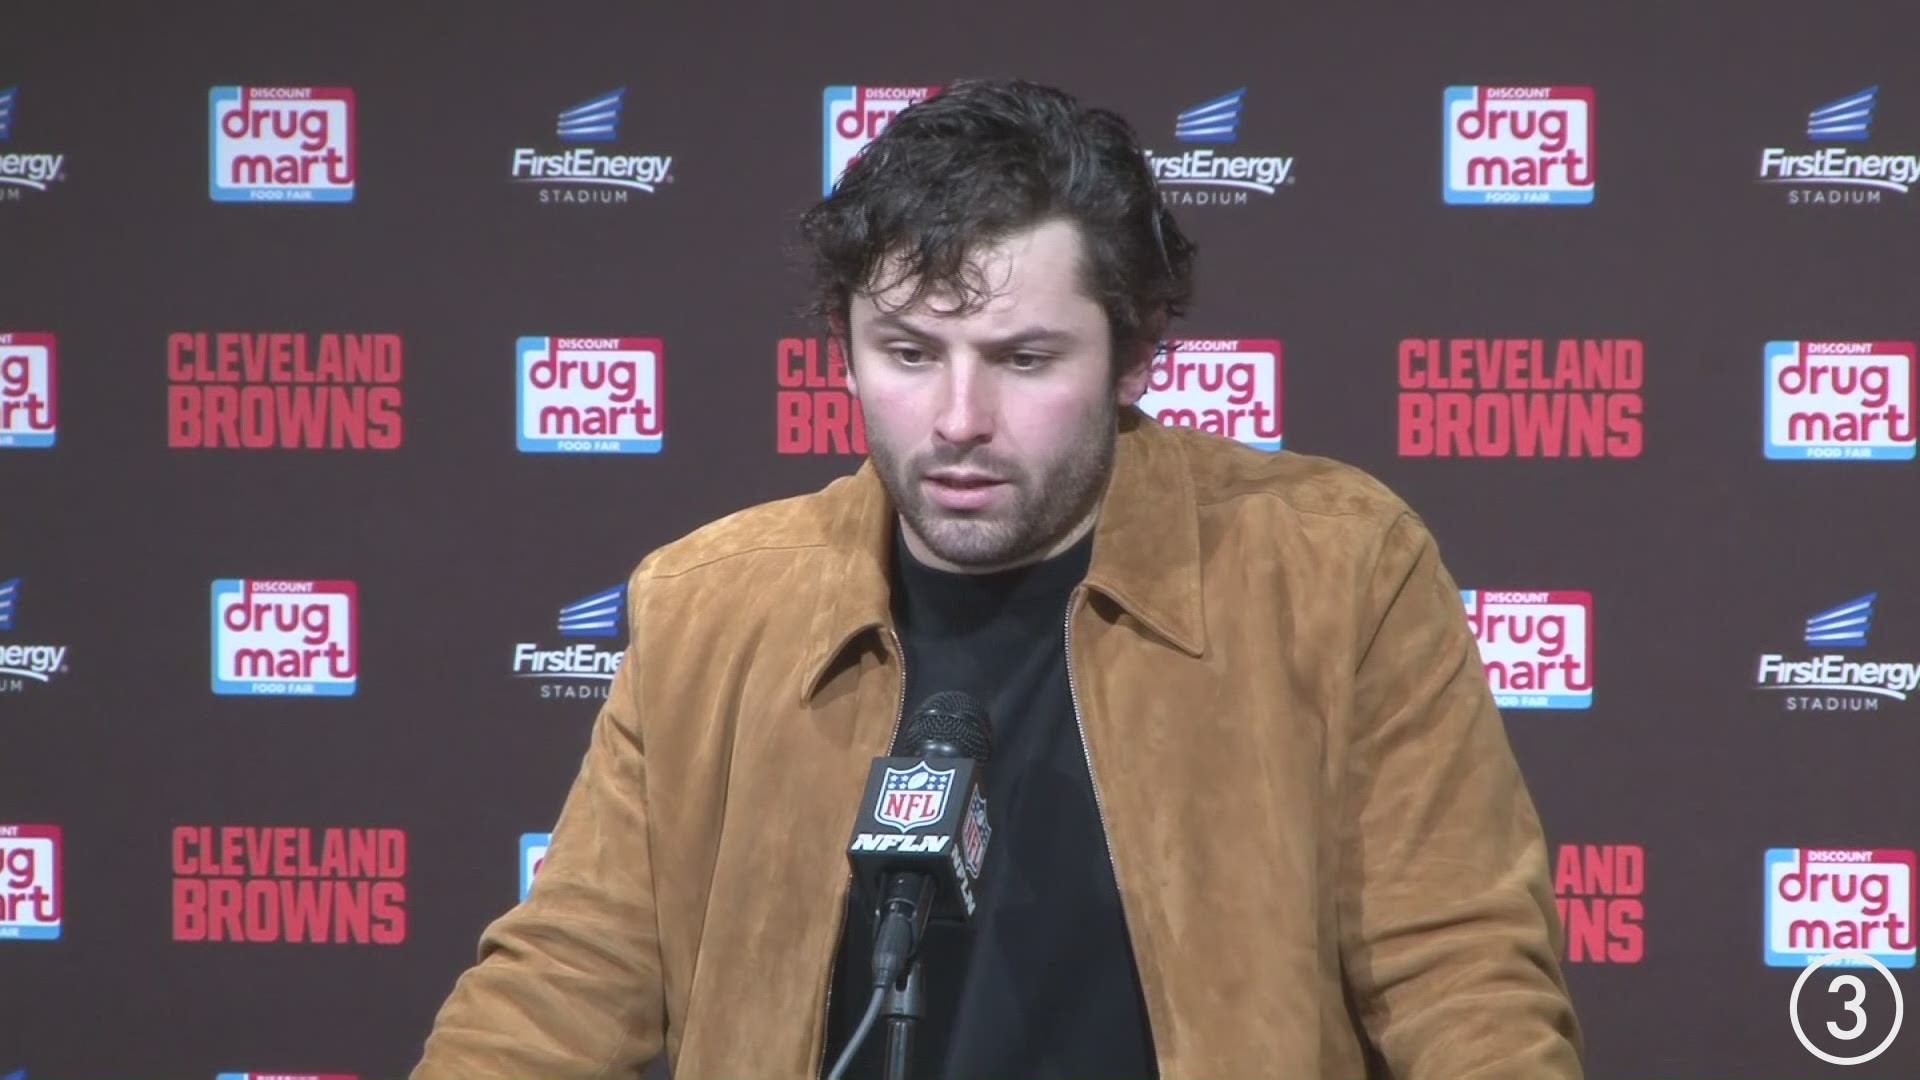 Cleveland Browns quarterback Baker Mayfield said that he doesn't think that Odell Beckham Jr.'s sports hernia injury was handled correctly.